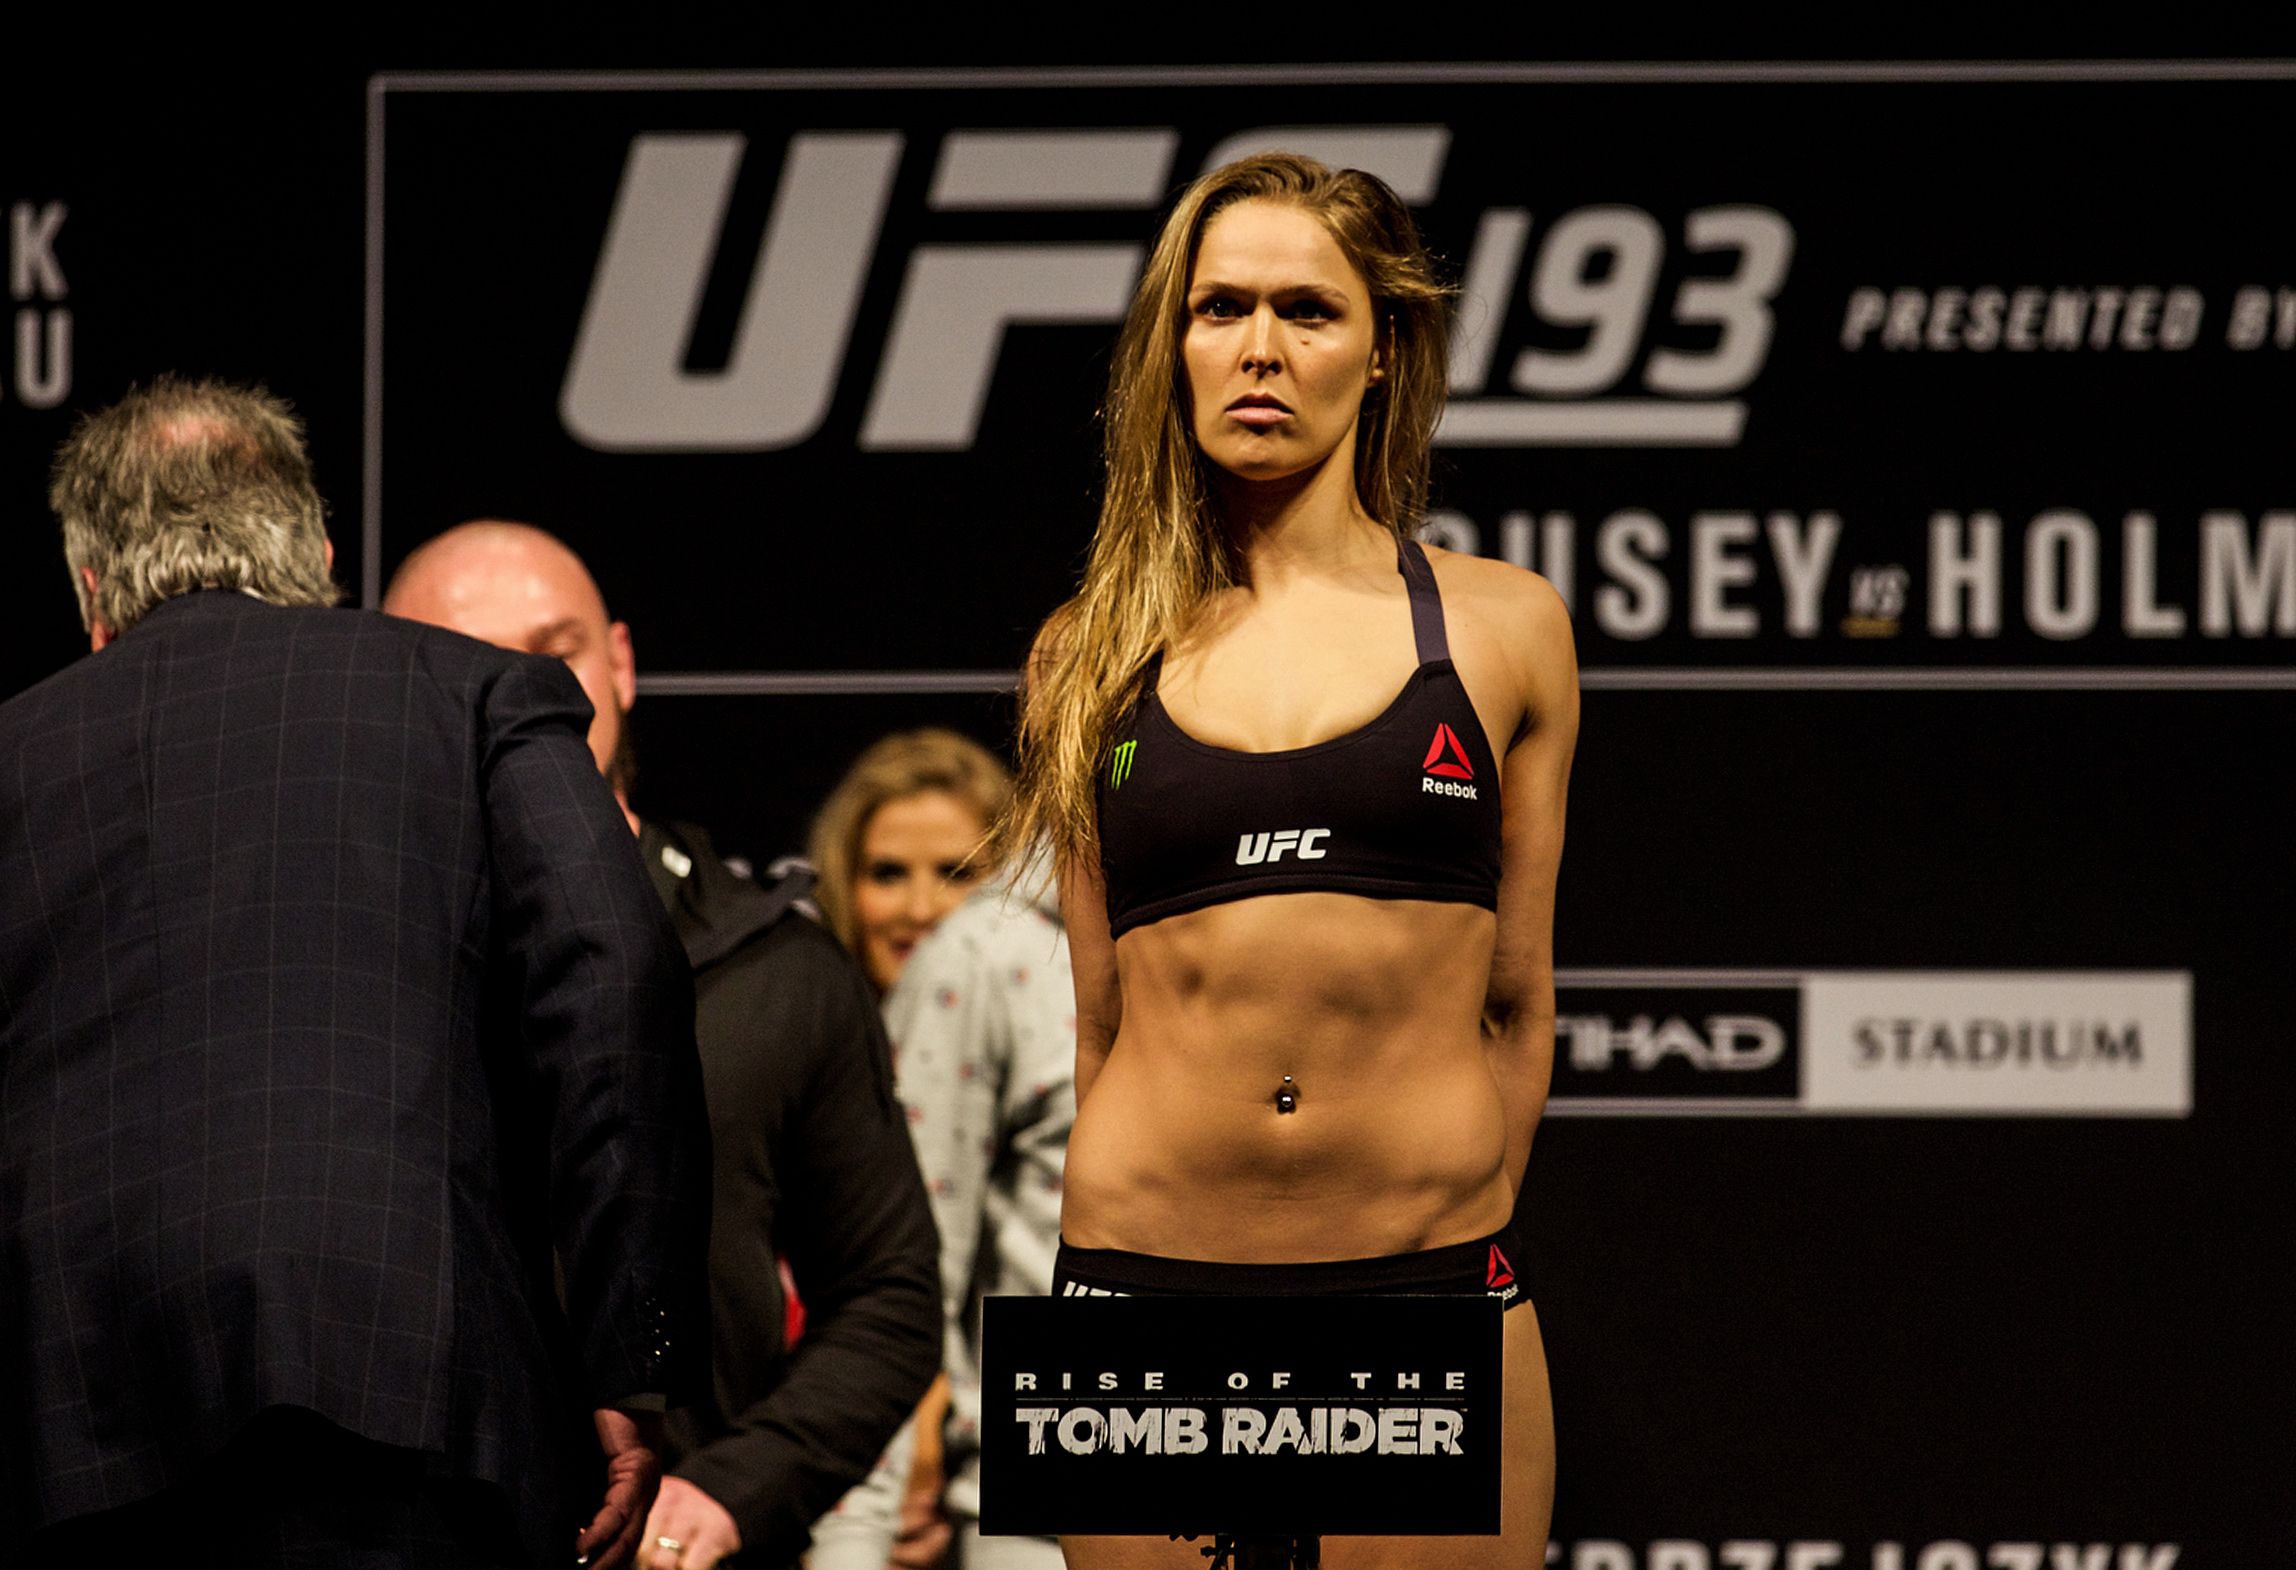 Weigh-in time - Photos: Behind the scenes with Ronda Rousey - ESPN2296 x 1570